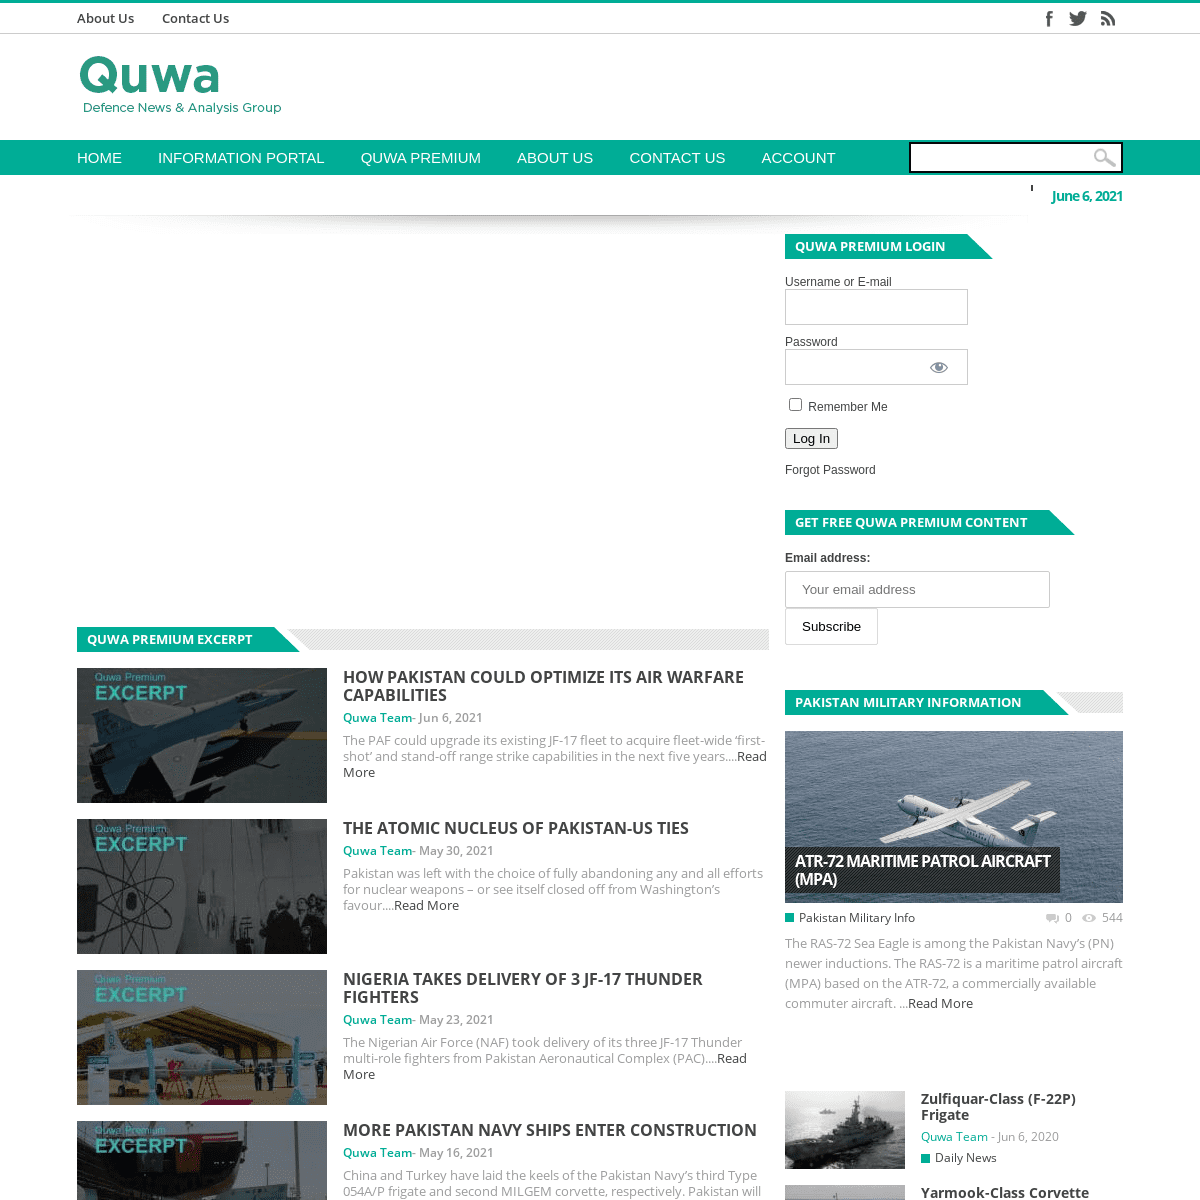 A complete backup of https://quwa.org